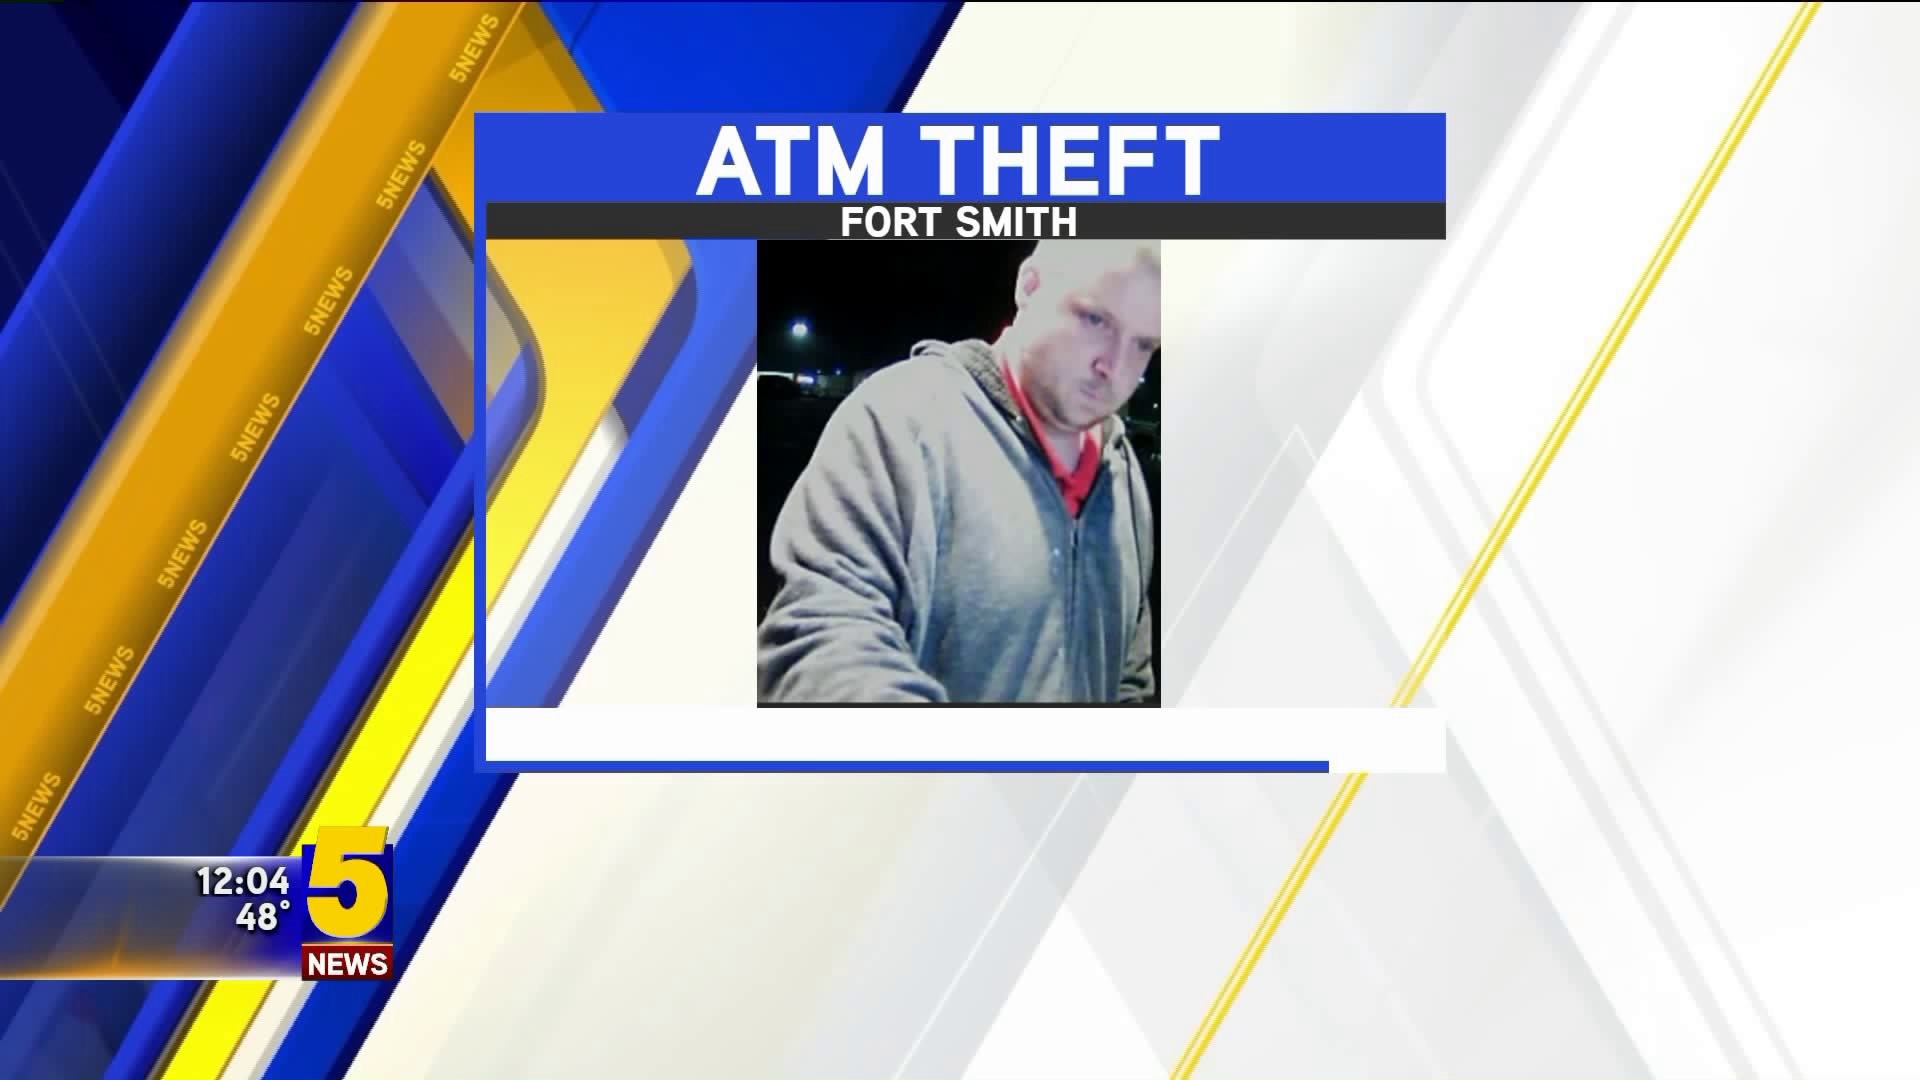 Fort Smith ATM Theft